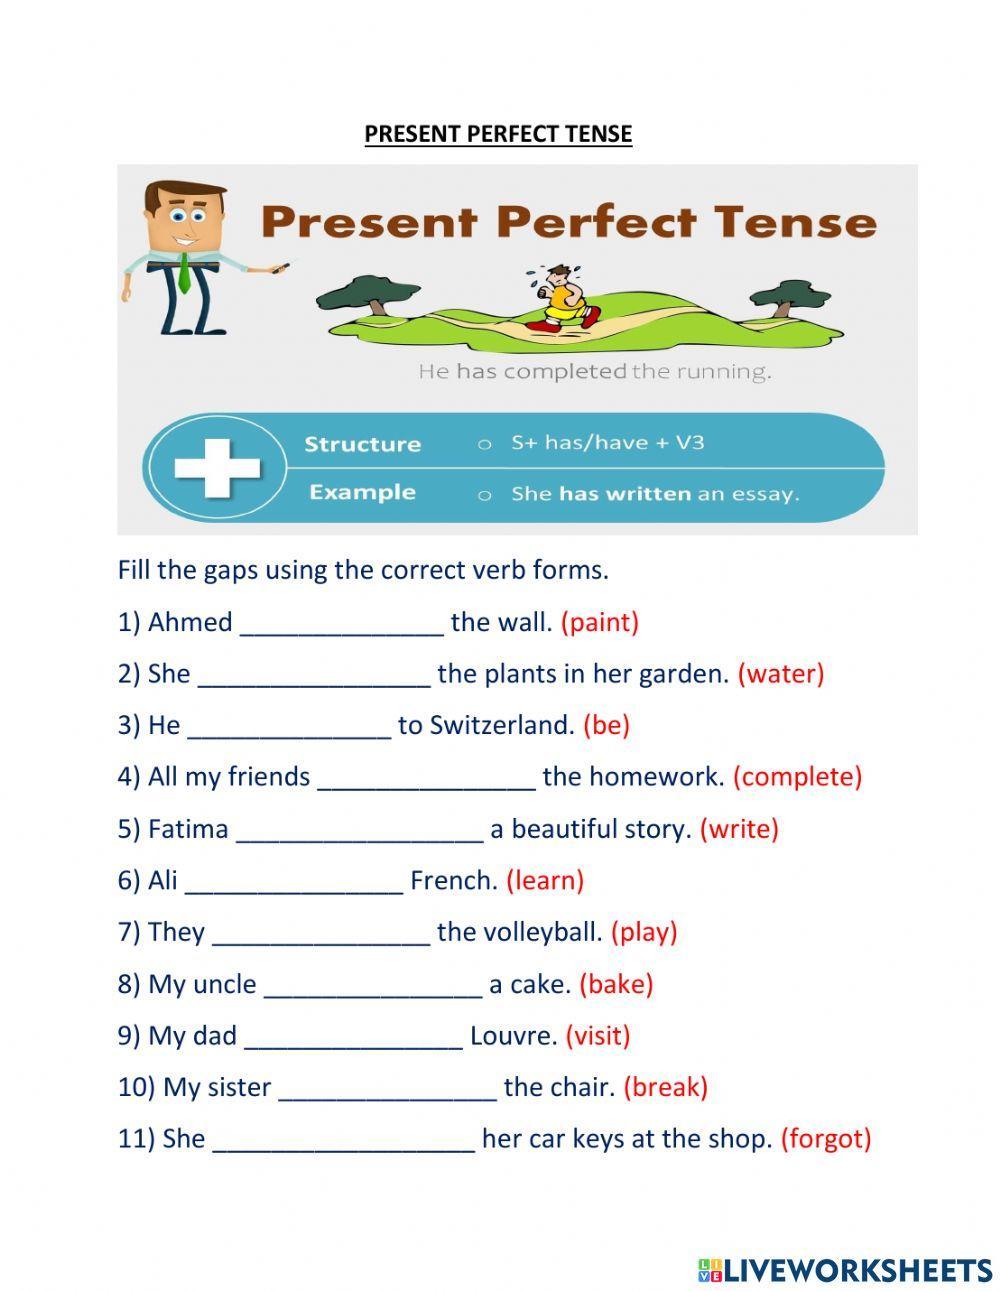 present-perfect-tense-online-exercise-for-grade-6-live-worksheets